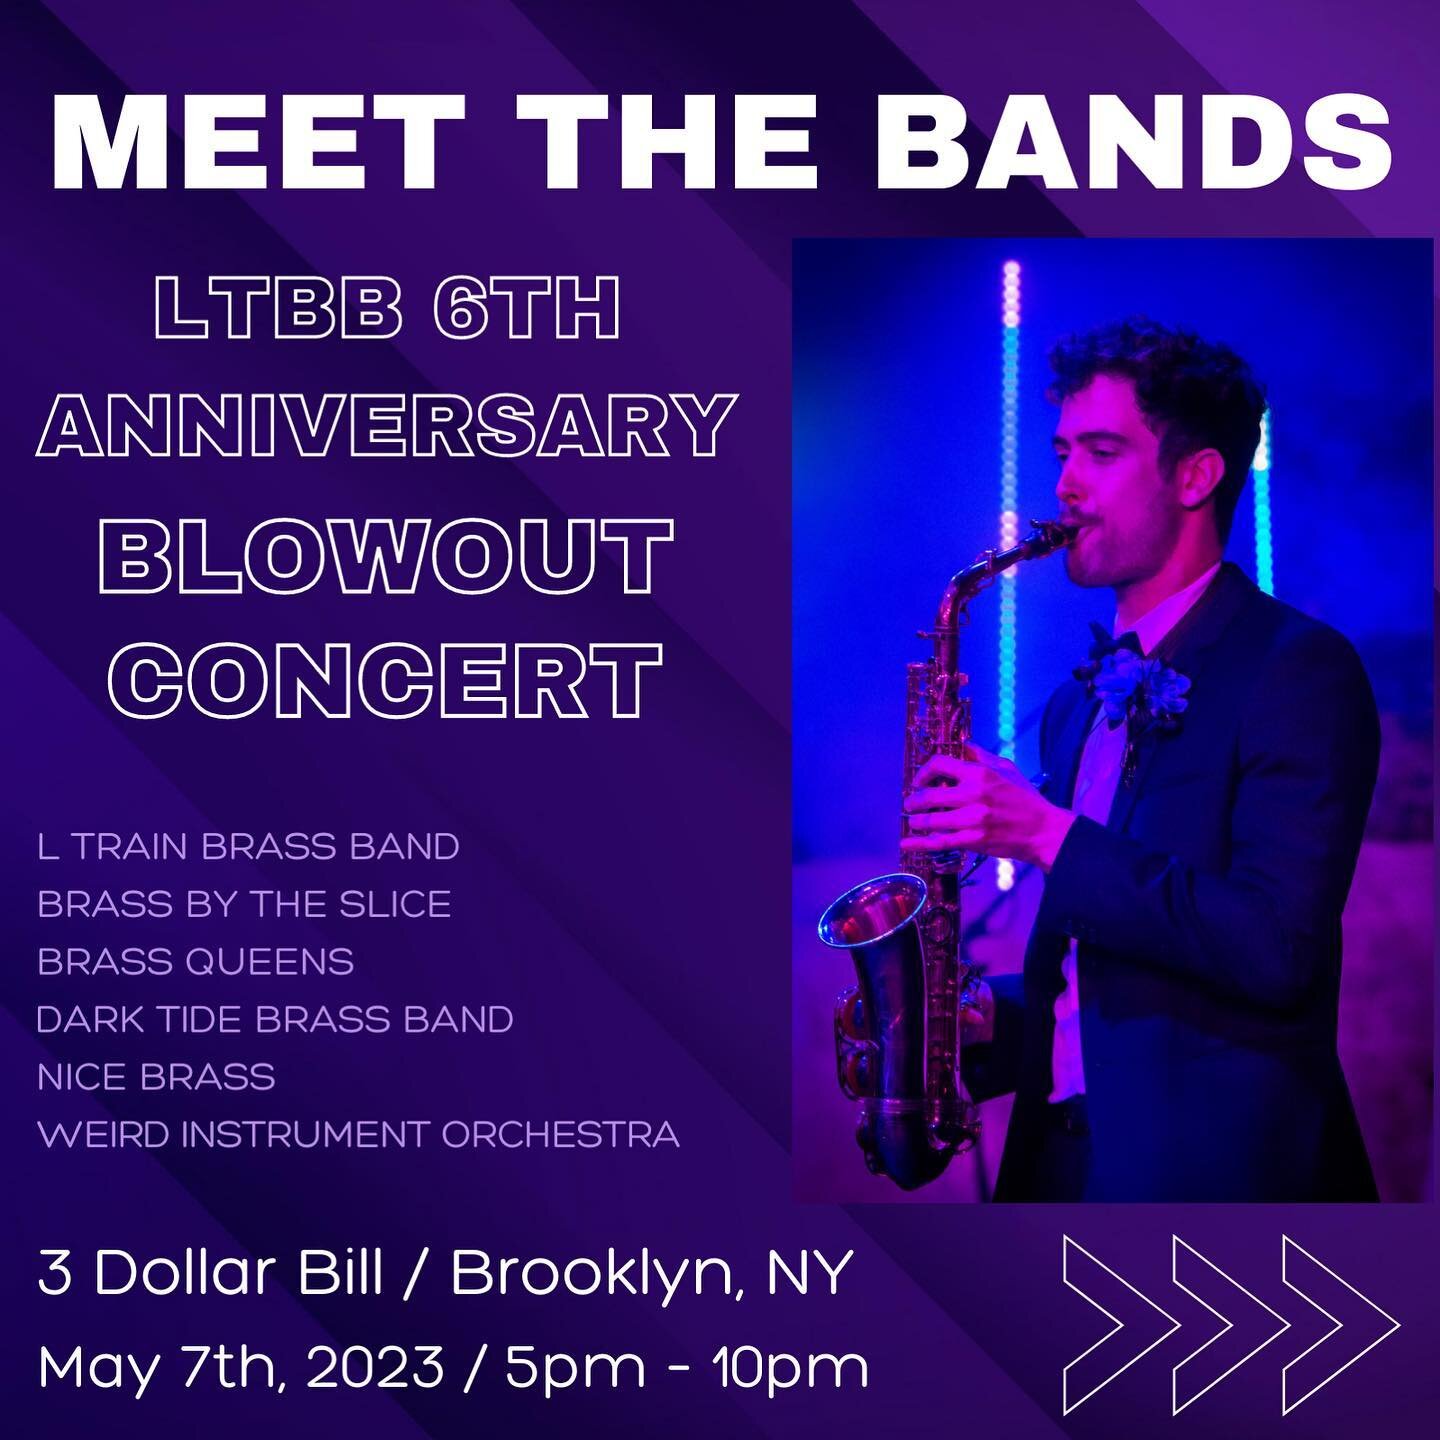 6 bands. 6 years of LTBB. 1 night. 

WHAT: ABC 6!
Featuring @brassbytheslice , @brassqueensnyc ,
@darktidebrass , @nicebrassnyc , and, your favorite, the
L Train Brass Band! Plus a special debut performance
from the Weird Instrument Orchestra 🤩🤩🤩
